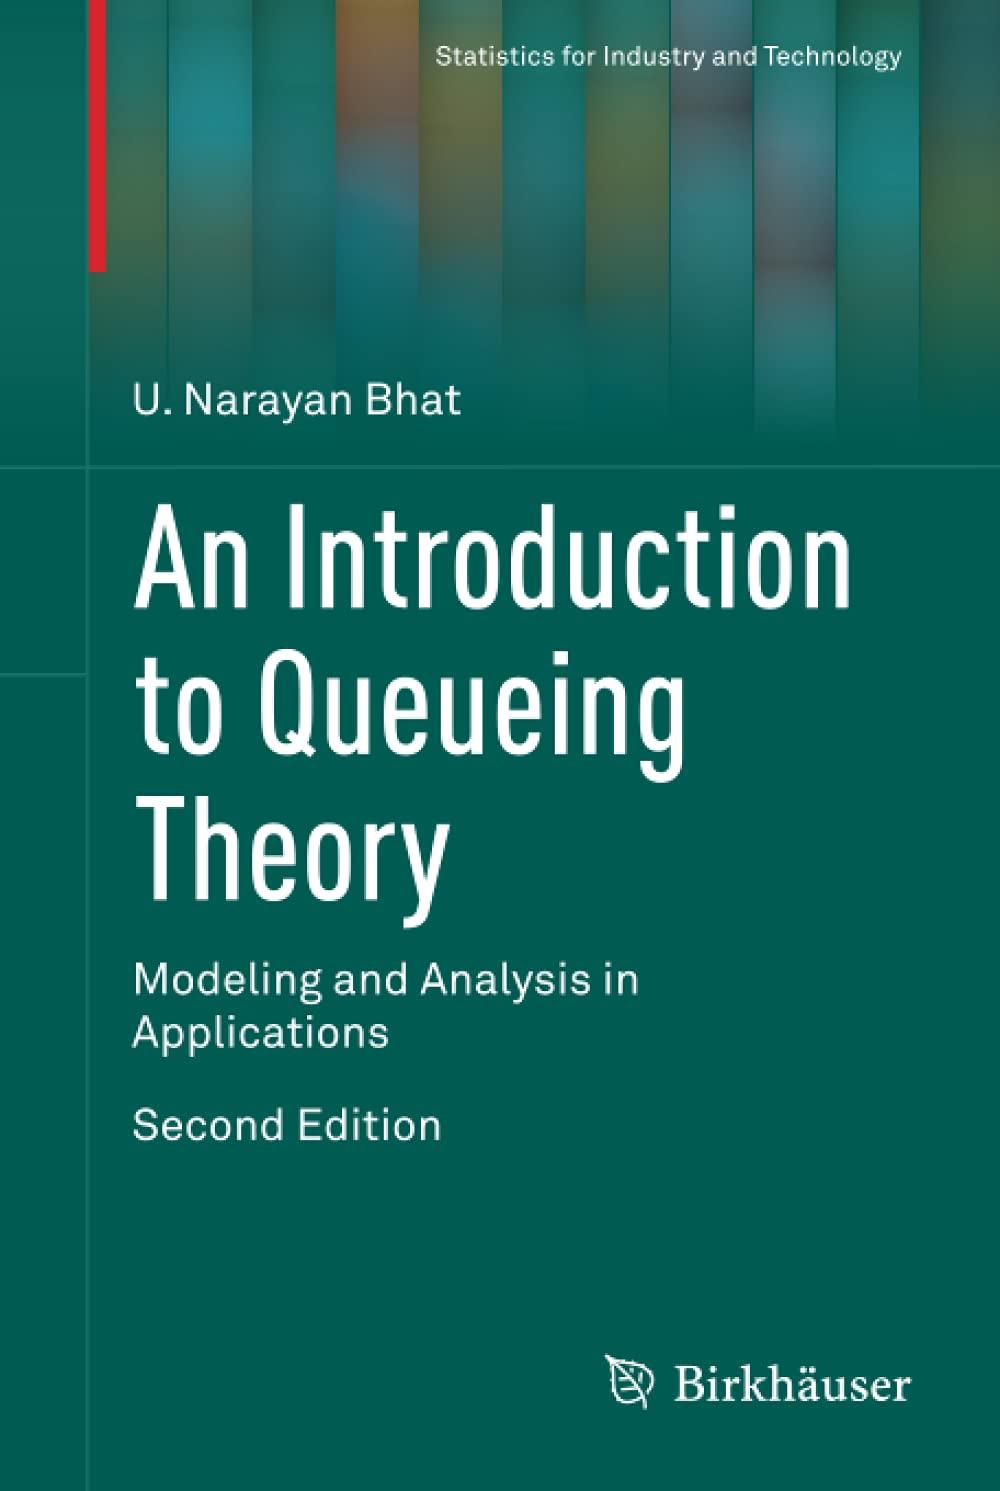 An Introduction To Queueing Theory